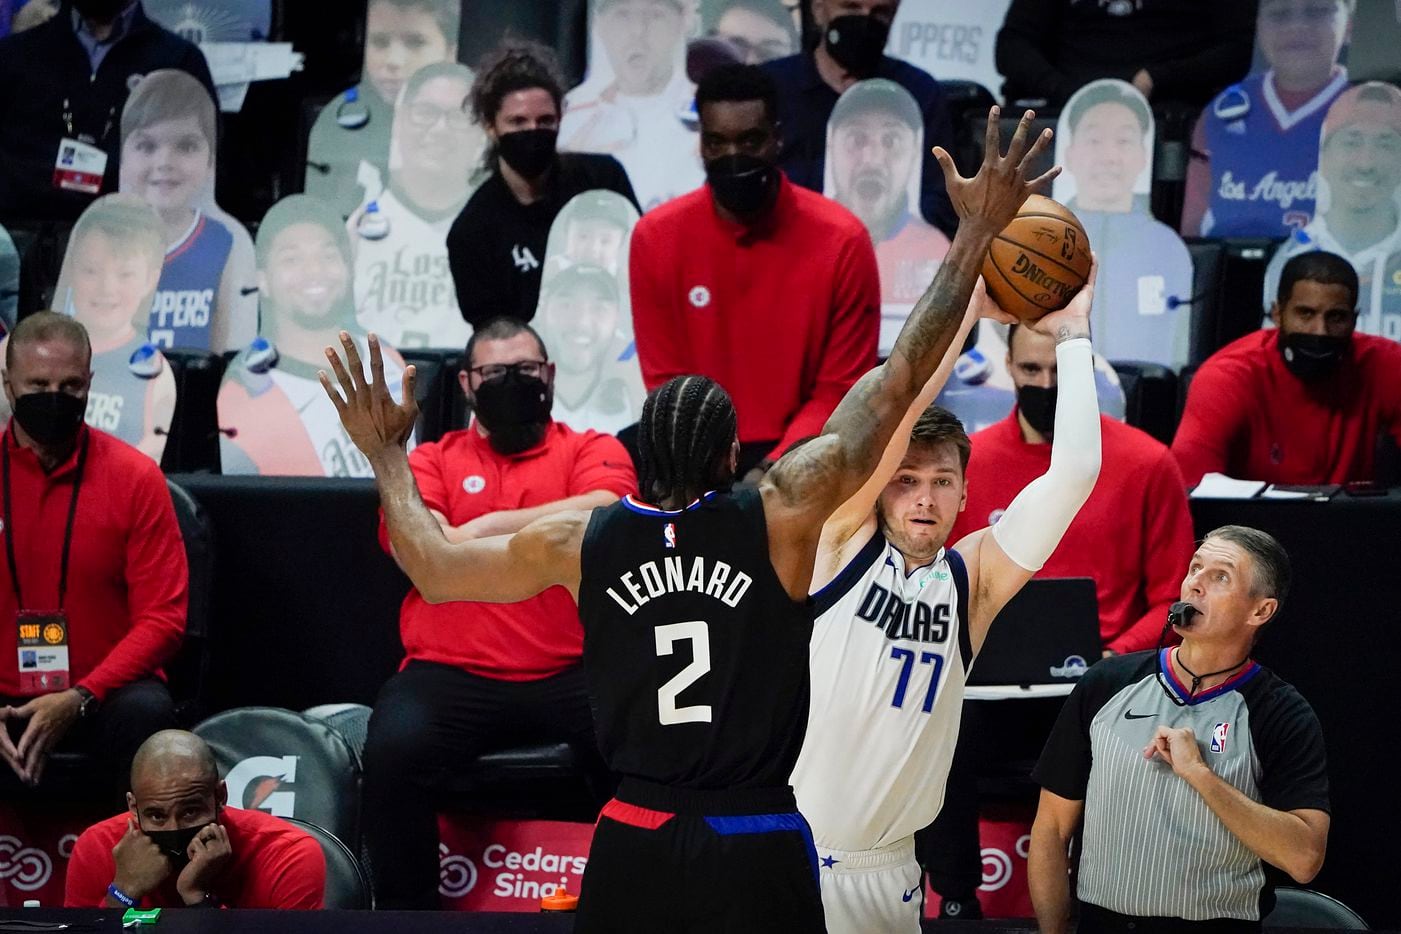 Dallas Mavericks guard Luka Doncic (77) inbounds the ball past LA Clippers forward Kawhi Leonard (2) during the second half of an NBA playoff basketball game at Staples Center on Wednesday, May 26, 2021, in Los Angeles. The Mavericks won the game 127-121.